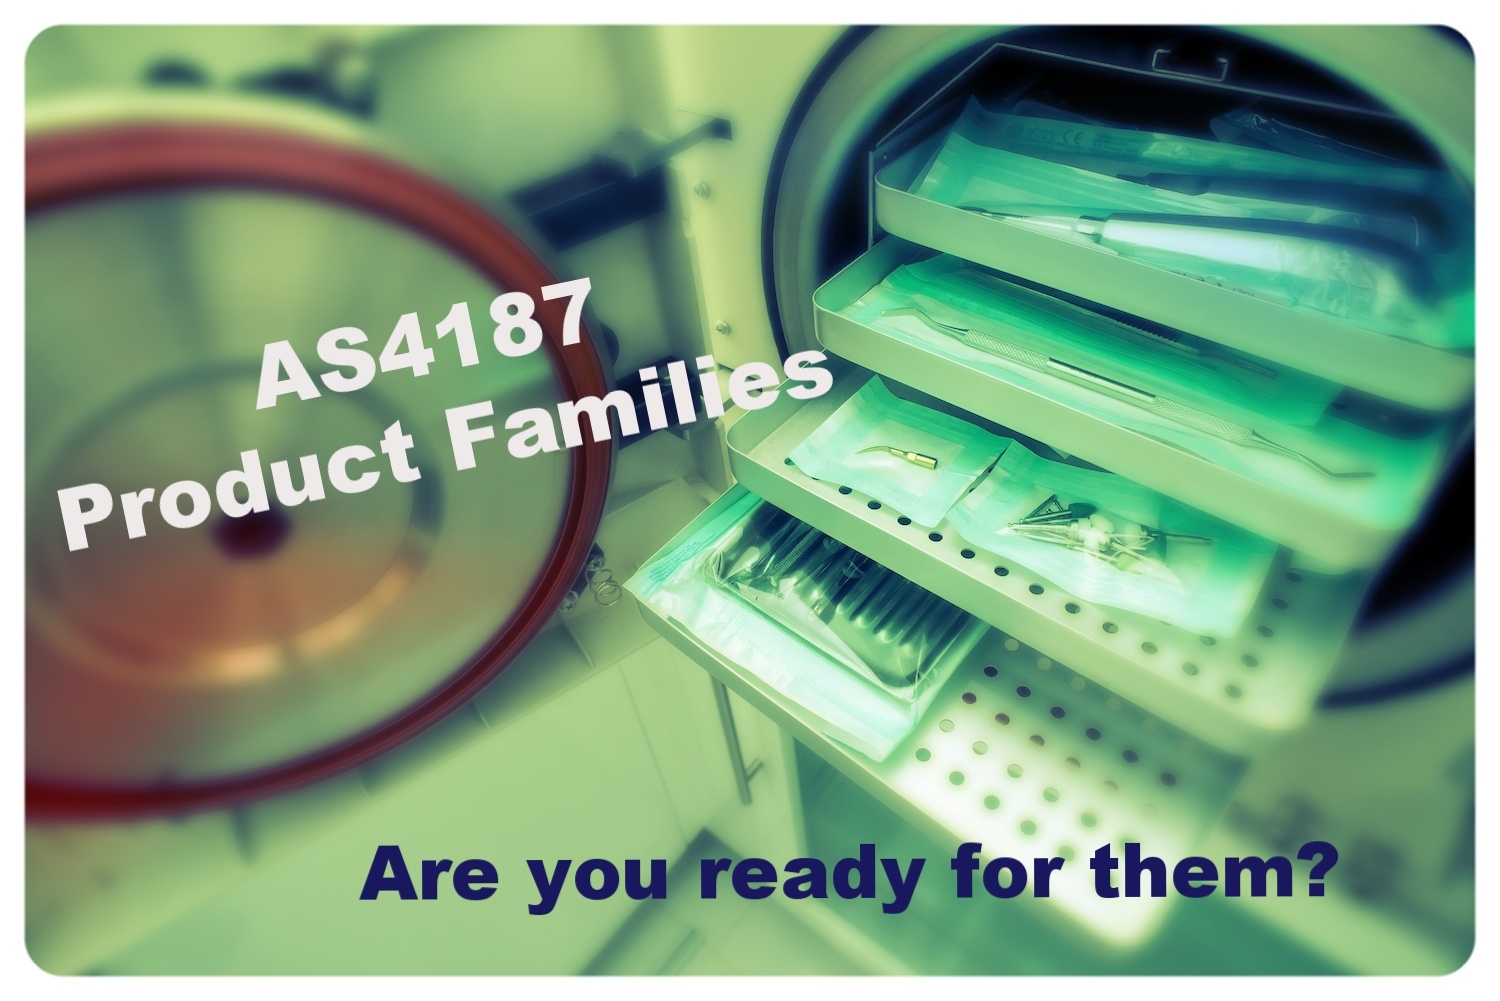 How to prepare for AS4187 product families compliance deadline